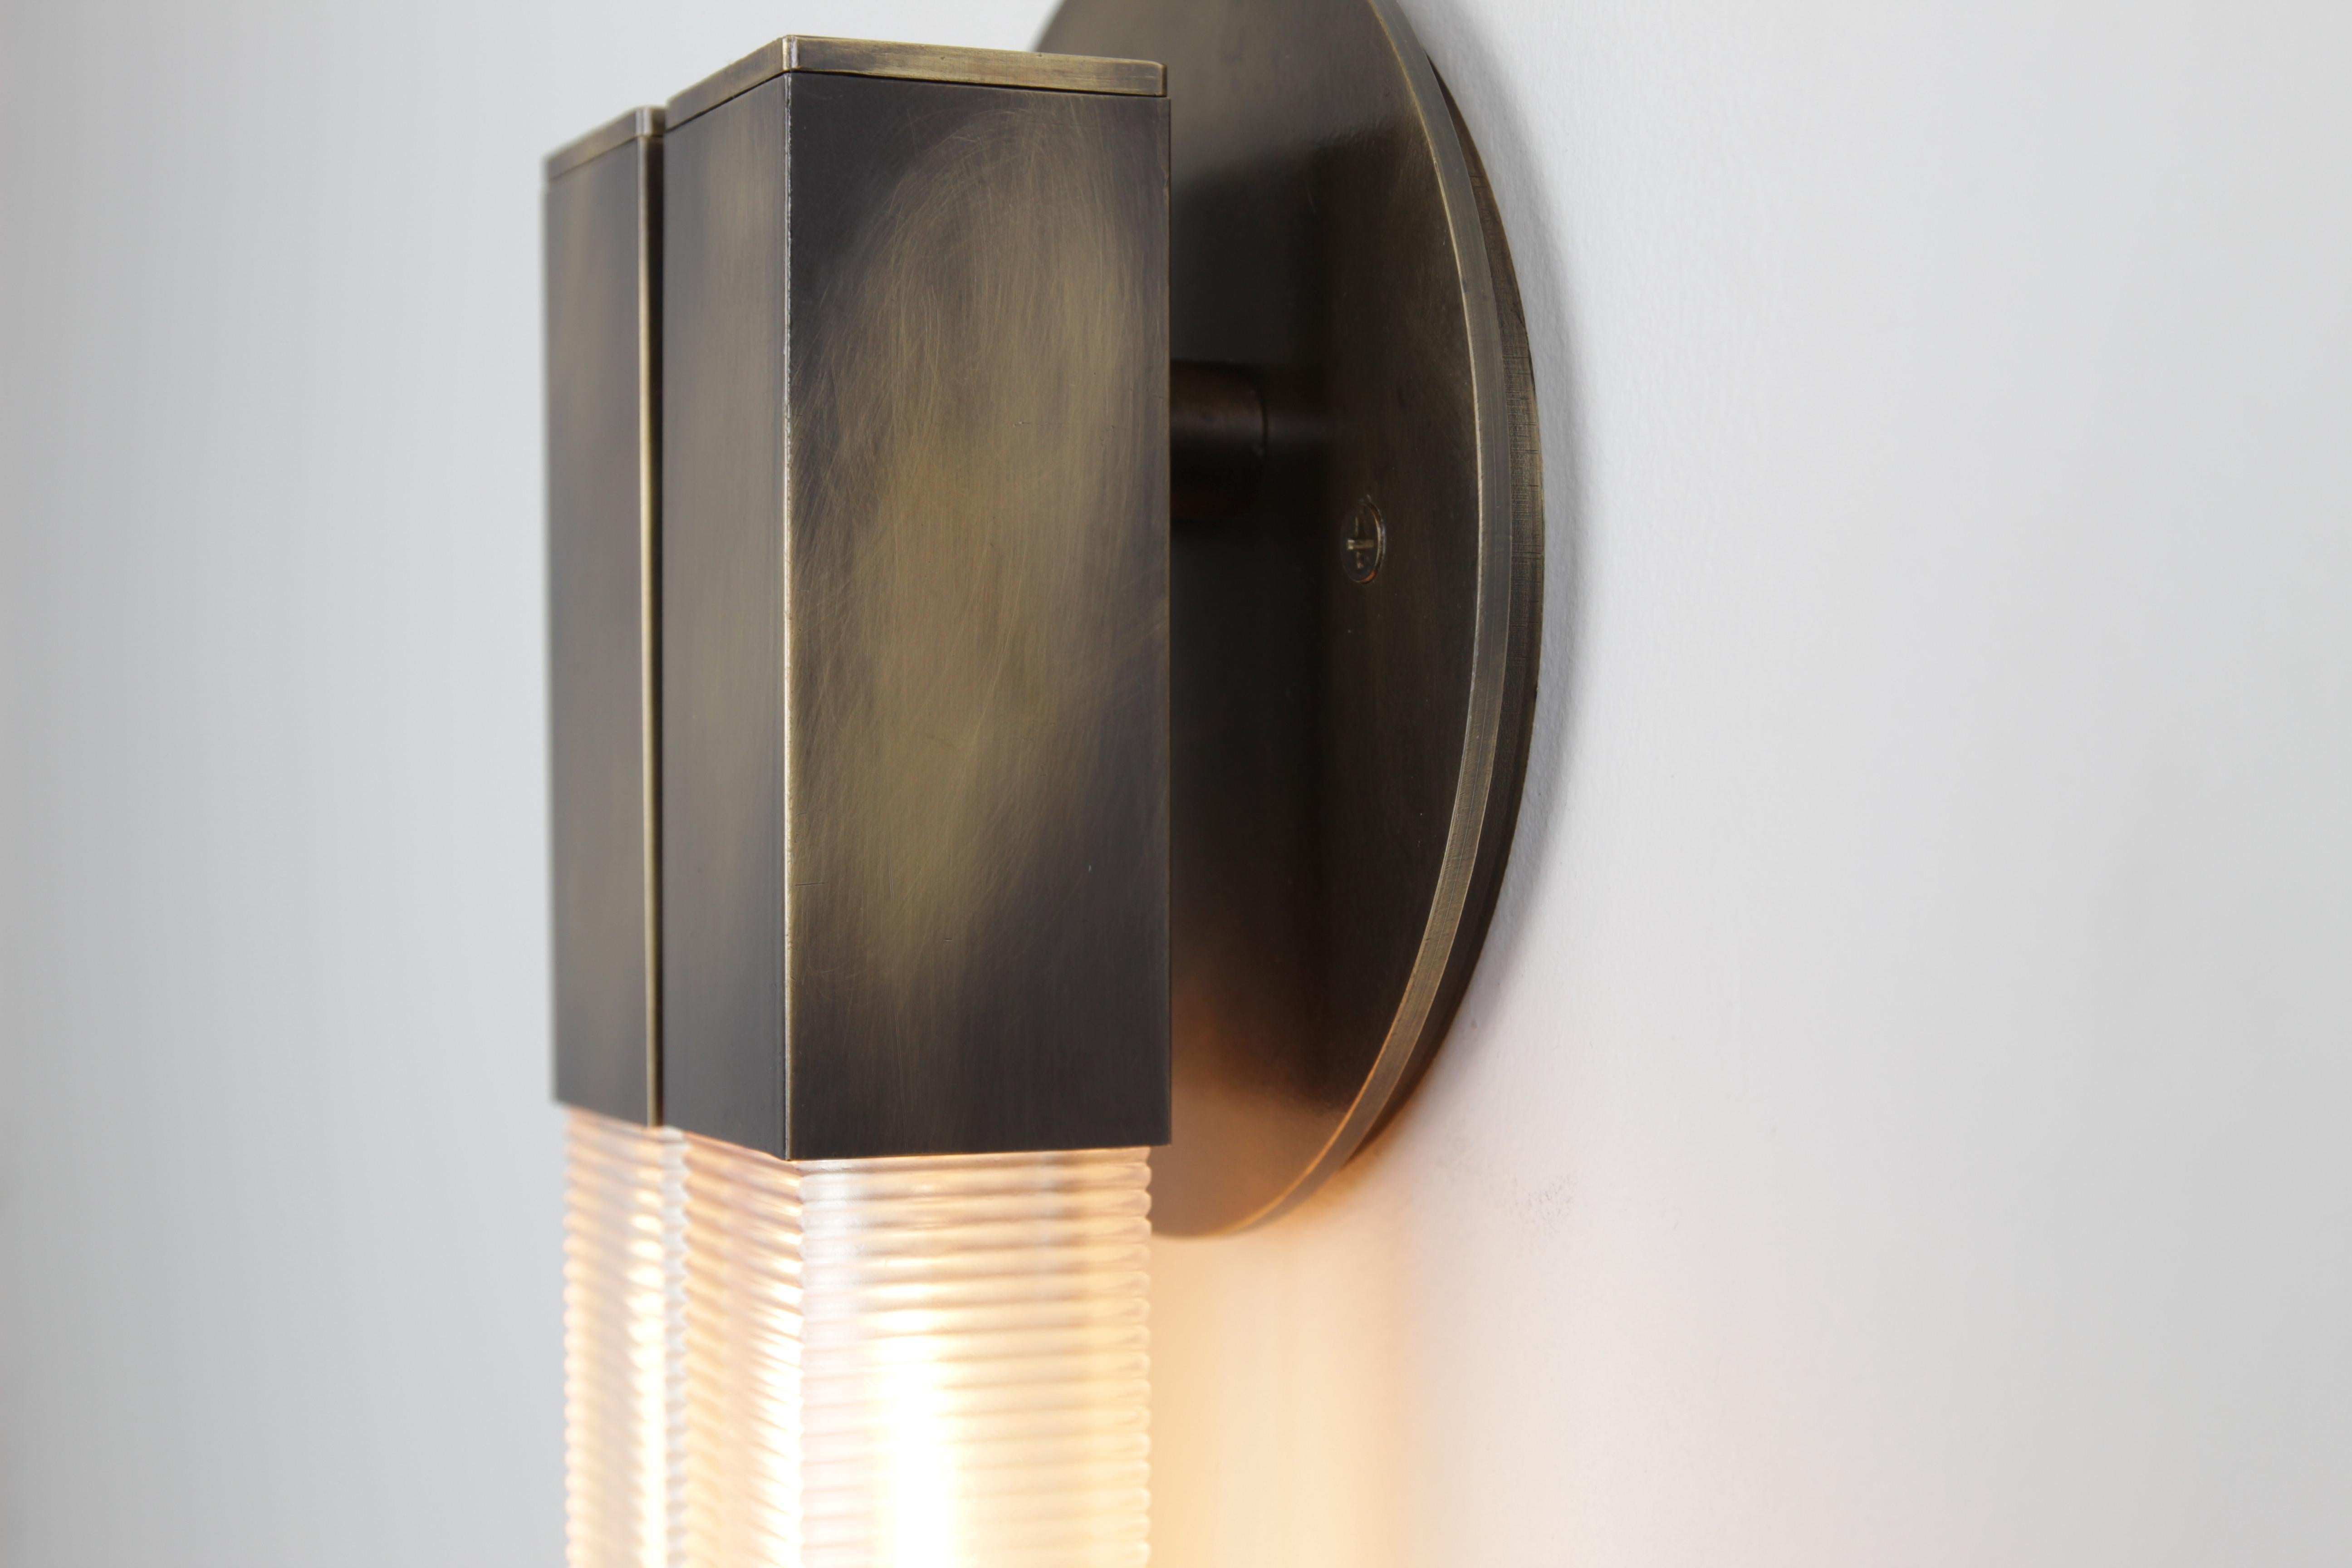 Daikon Studio  POST  2.0 Sconce 

The 2.0 Sconce celebrates the poetic dialogue between light and form to create a fixture that leans into the timeless and iconic. Meticulously crafted by hand in our studios. Horizontal or vertical